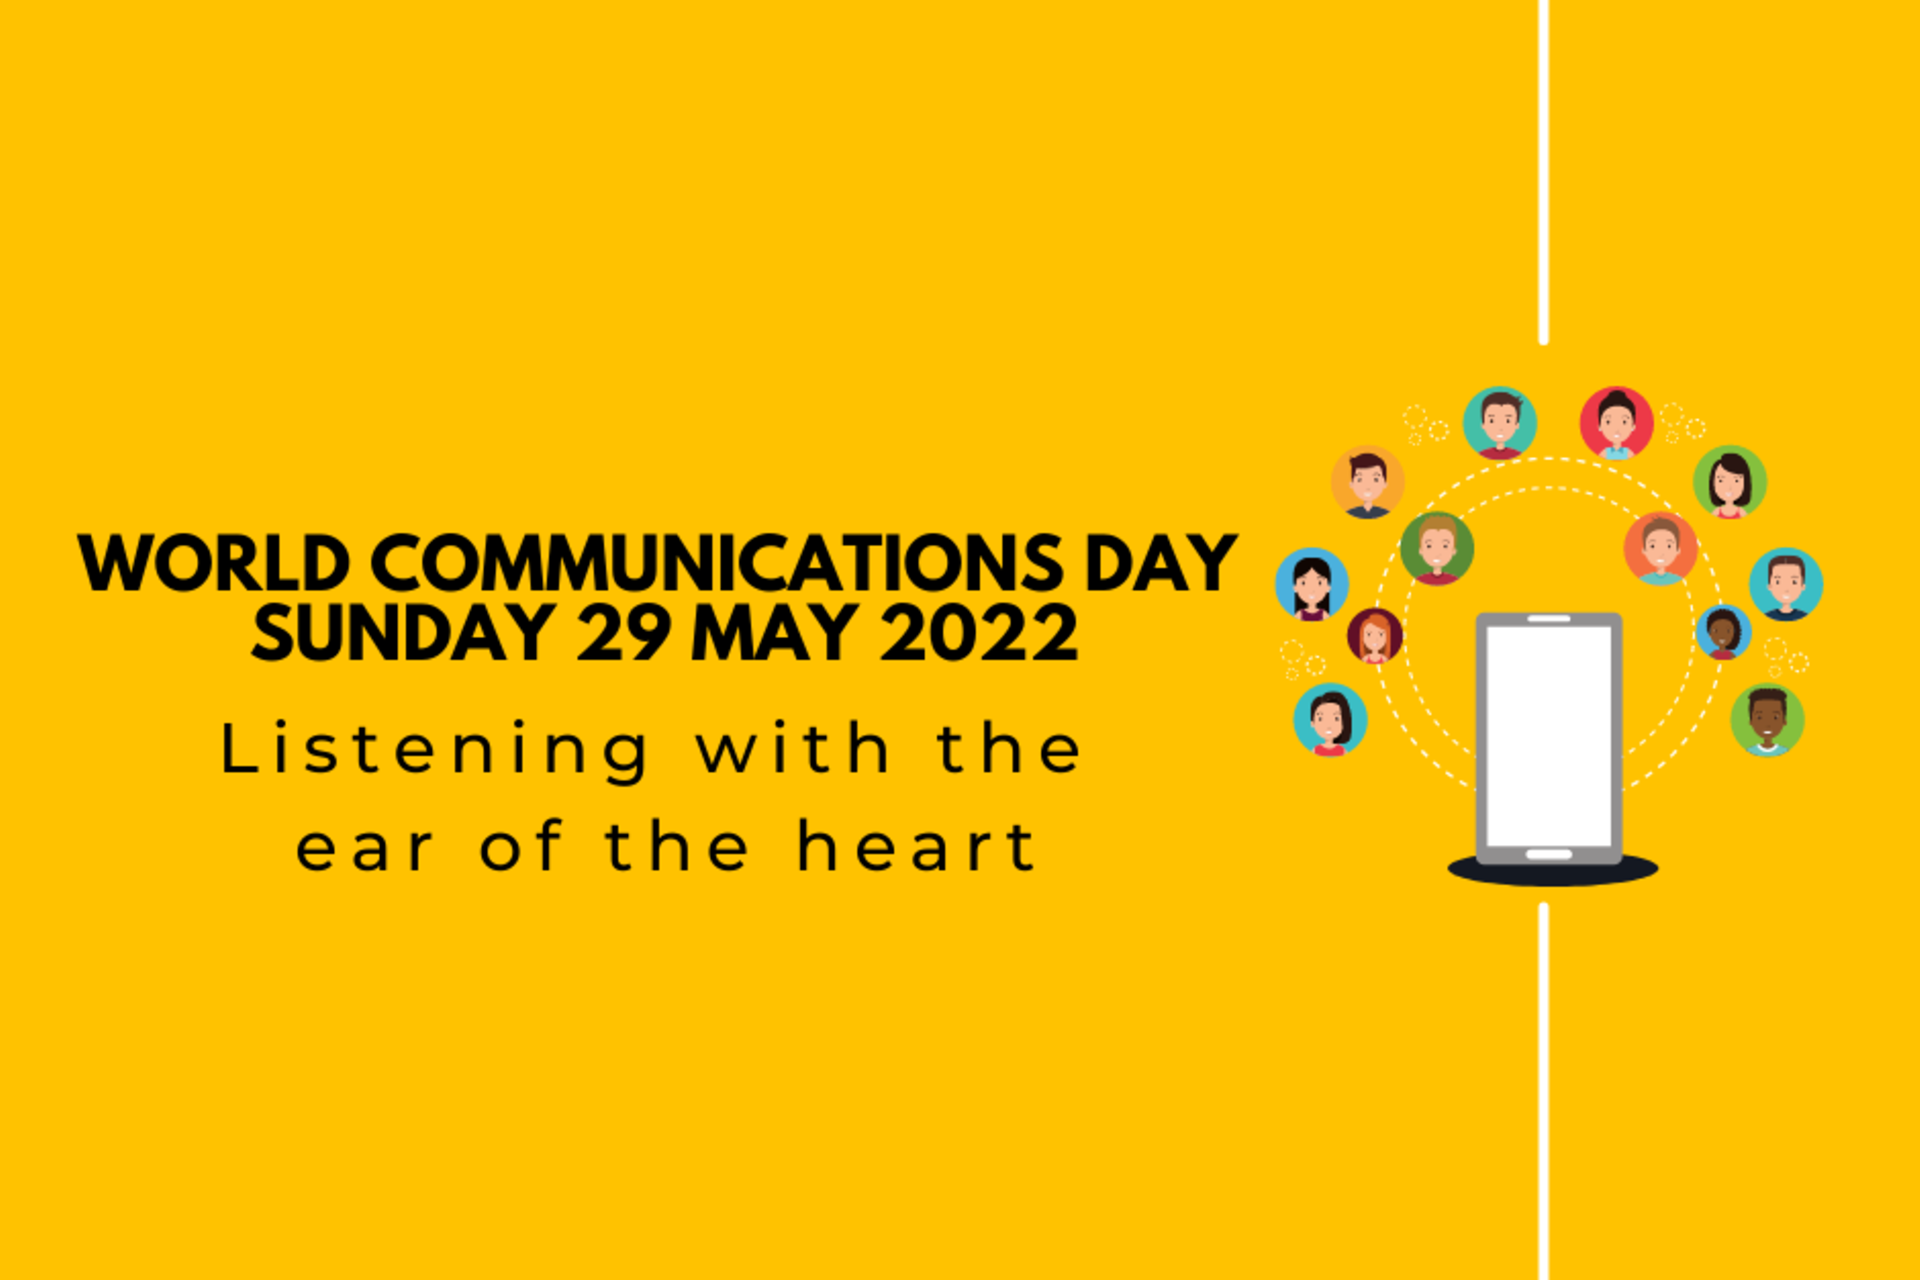 Resources for World Communications Day 2022